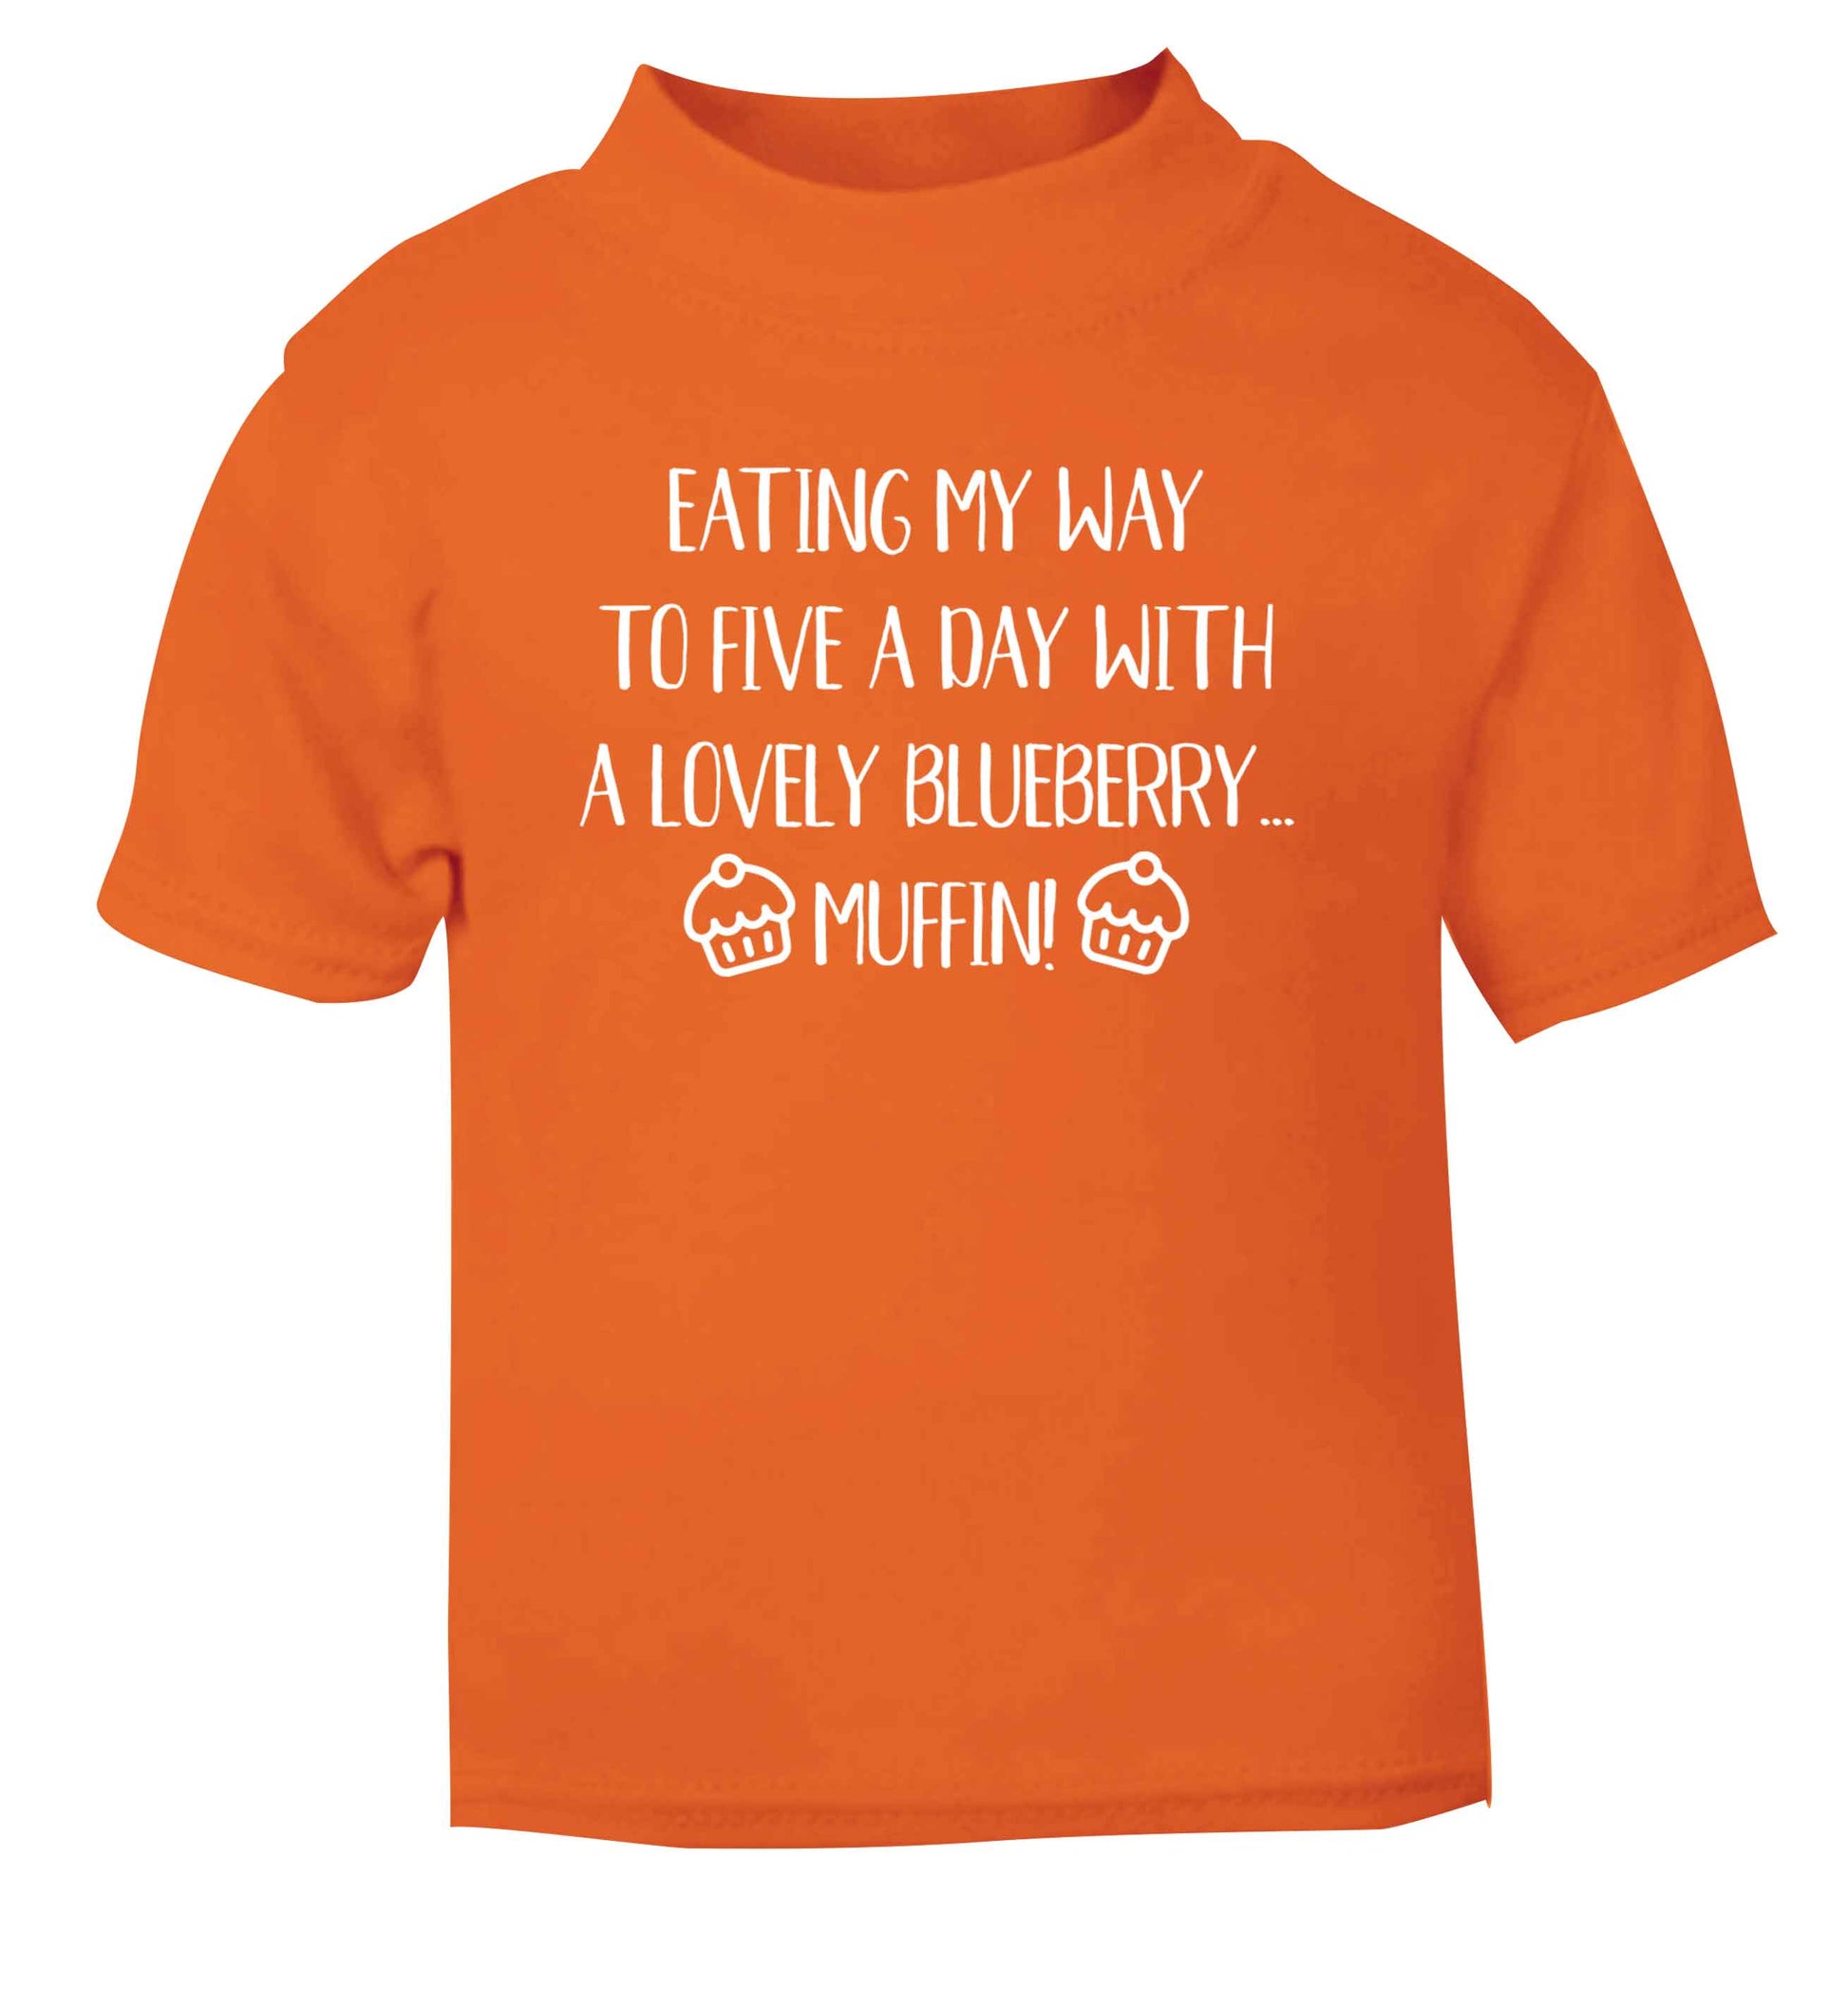 Eating my way to five a day with a lovely blueberry muffin orange Baby Toddler Tshirt 2 Years